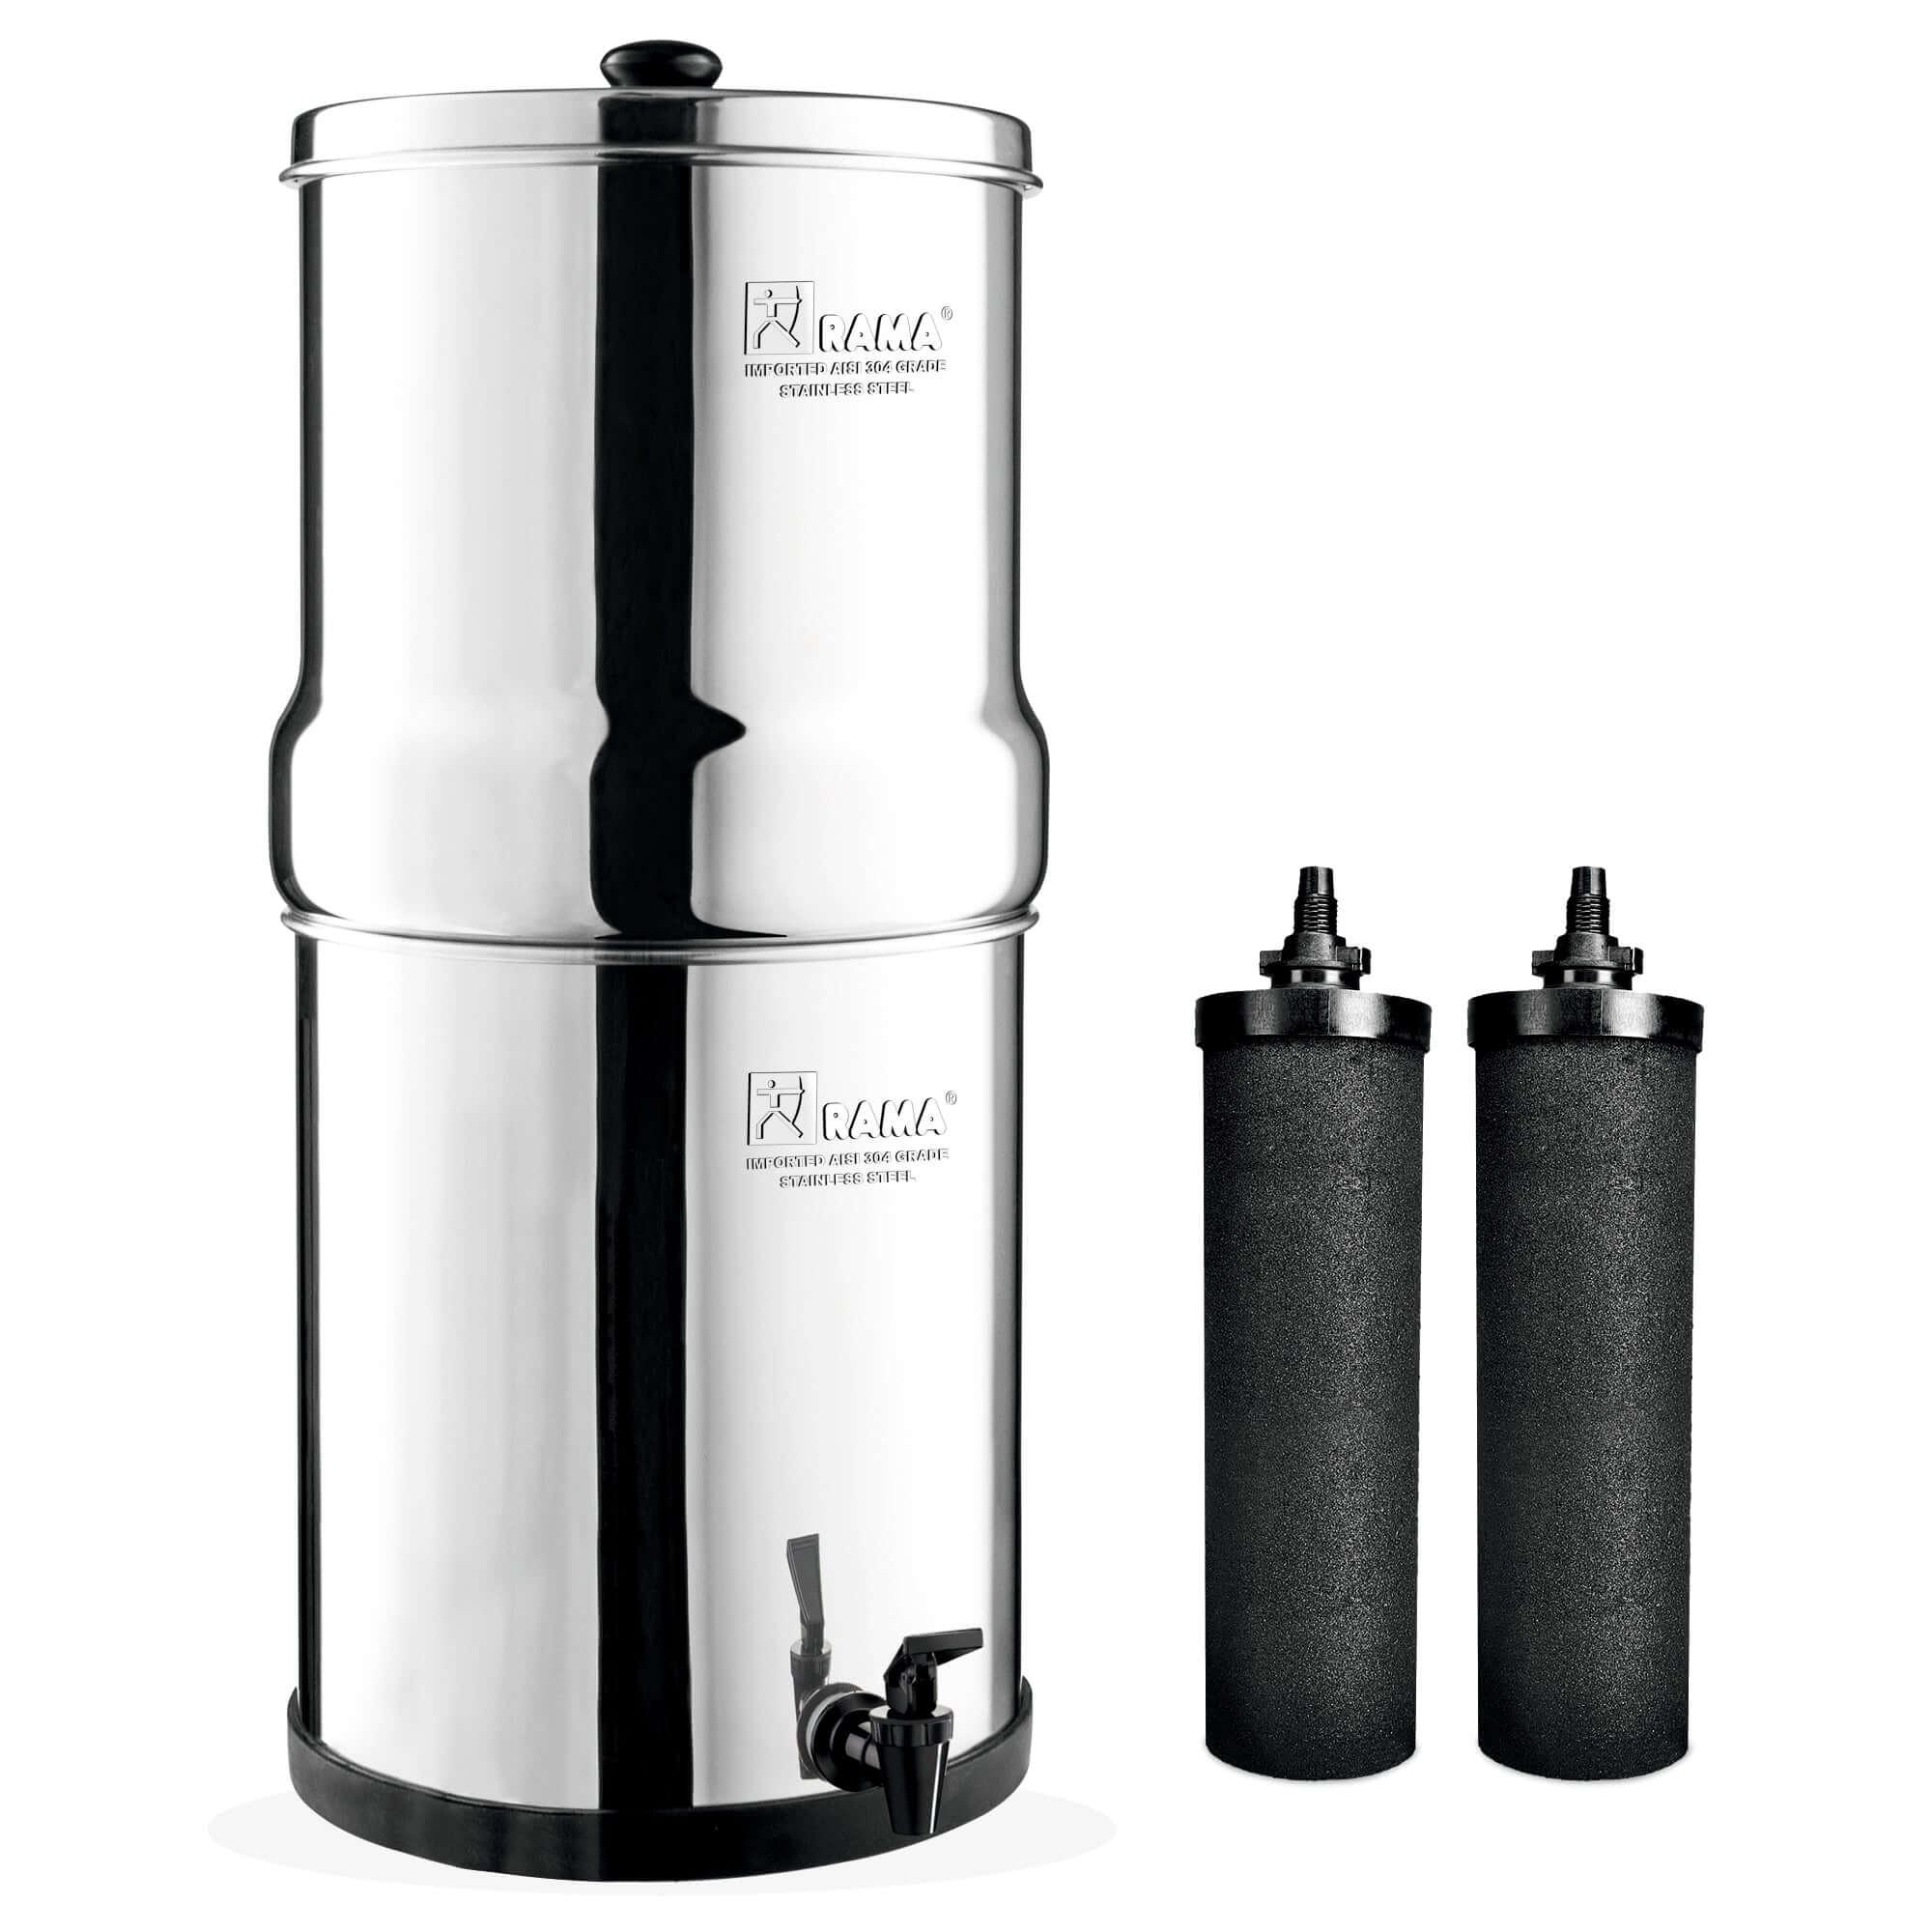 RAMA Water Filter and Purifier, 6 Litre Storage (12 Litre Total Capacity) Made with 304 High Grade Stainless Steel, 10-Year Manufacturer Warranty, Includes 2 Carbon Candles and Plastic Tap - Rama Water Filters